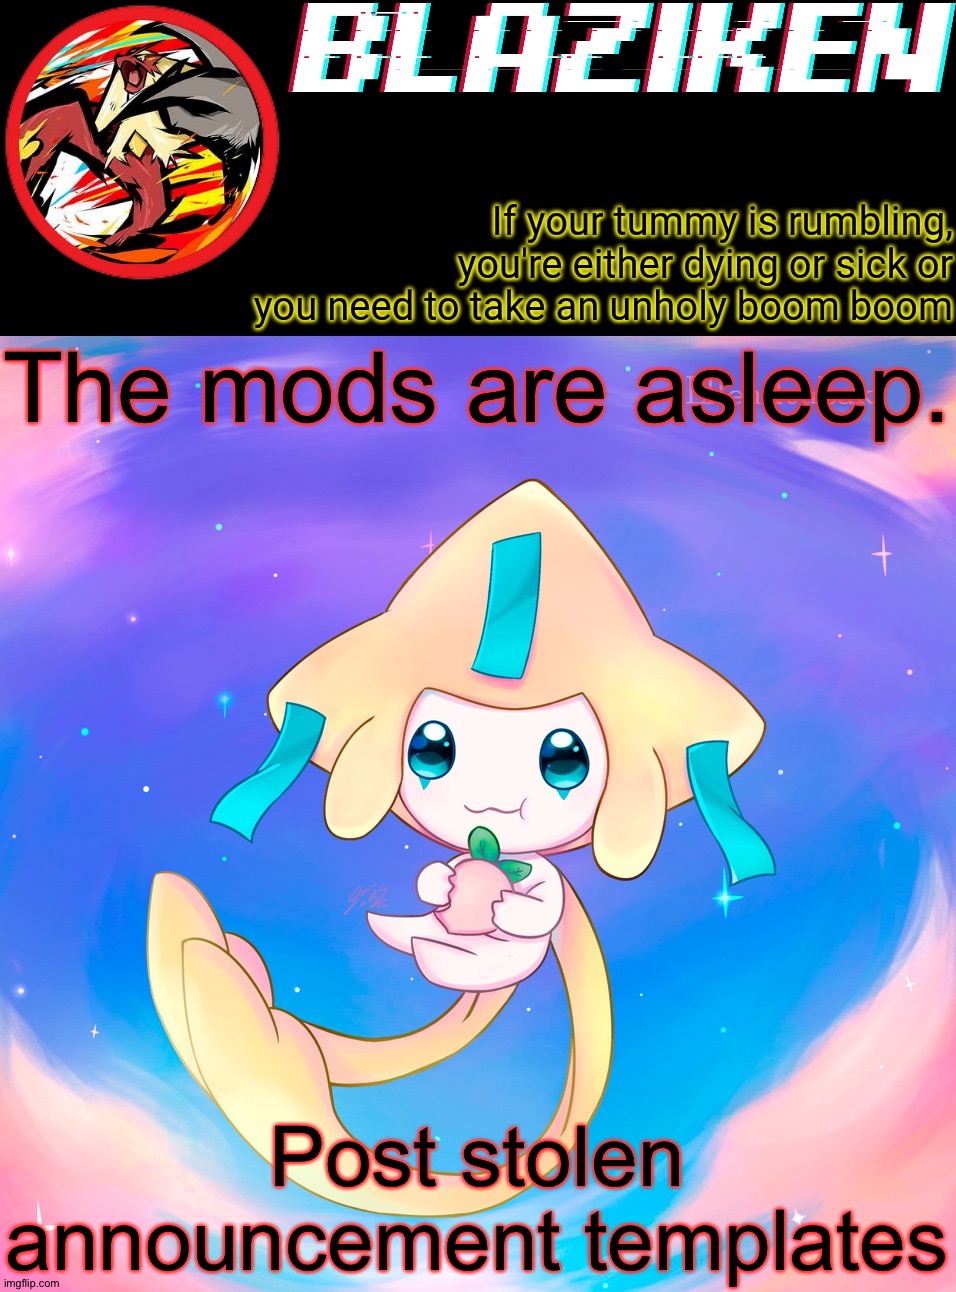 Blaziken's jirachi temp | The mods are asleep. Post stolen announcement templates | image tagged in blaziken's jirachi temp | made w/ Imgflip meme maker